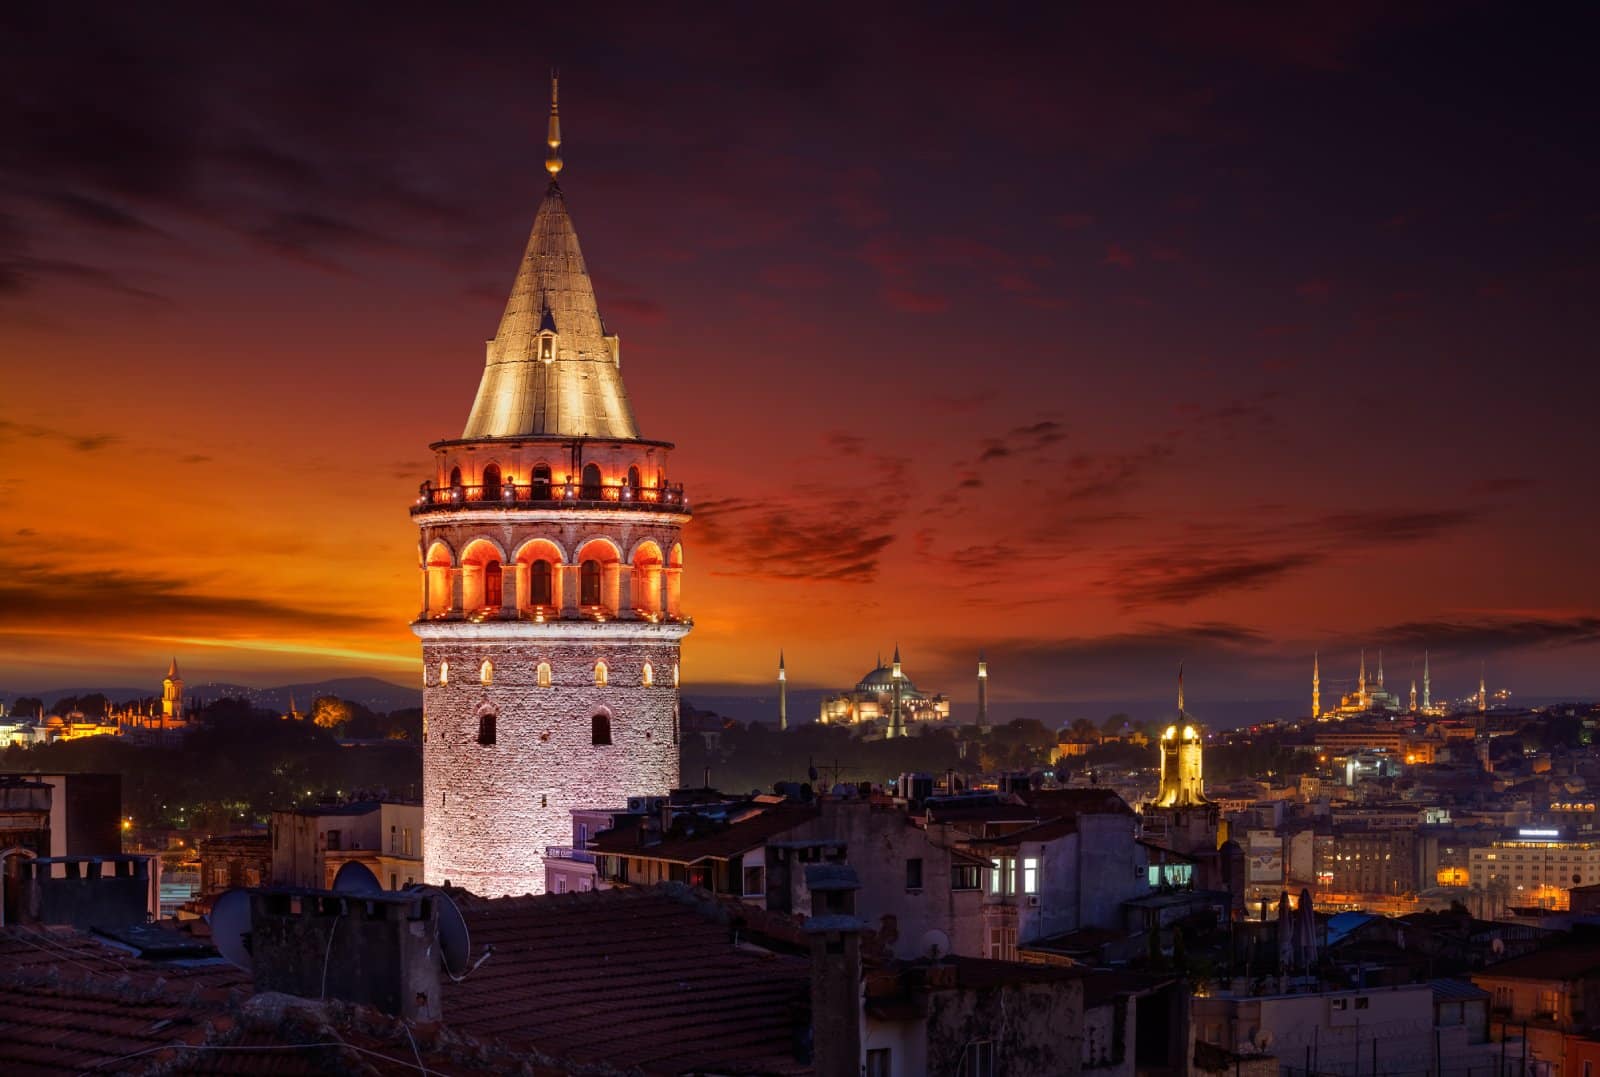 <p class="wp-caption-text">Image Credit: Shutterstock / Stoktur</p>  <p><span>The Galata Tower, a medieval stone tower in the Galata/Karaköy quarter, offers one of the best panoramic views of Istanbul. Originally built as a watchtower, it now features a restaurant and café on its upper floors. The tower’s balcony encircles the structure, providing a 360-degree view that spans the Golden Horn, Bosphorus, and the Asian side of Istanbul. Visiting the Galata Tower is an opportunity to see the city from a different perspective, highlighting the blend of old and new that characterizes Istanbul.</span></p>